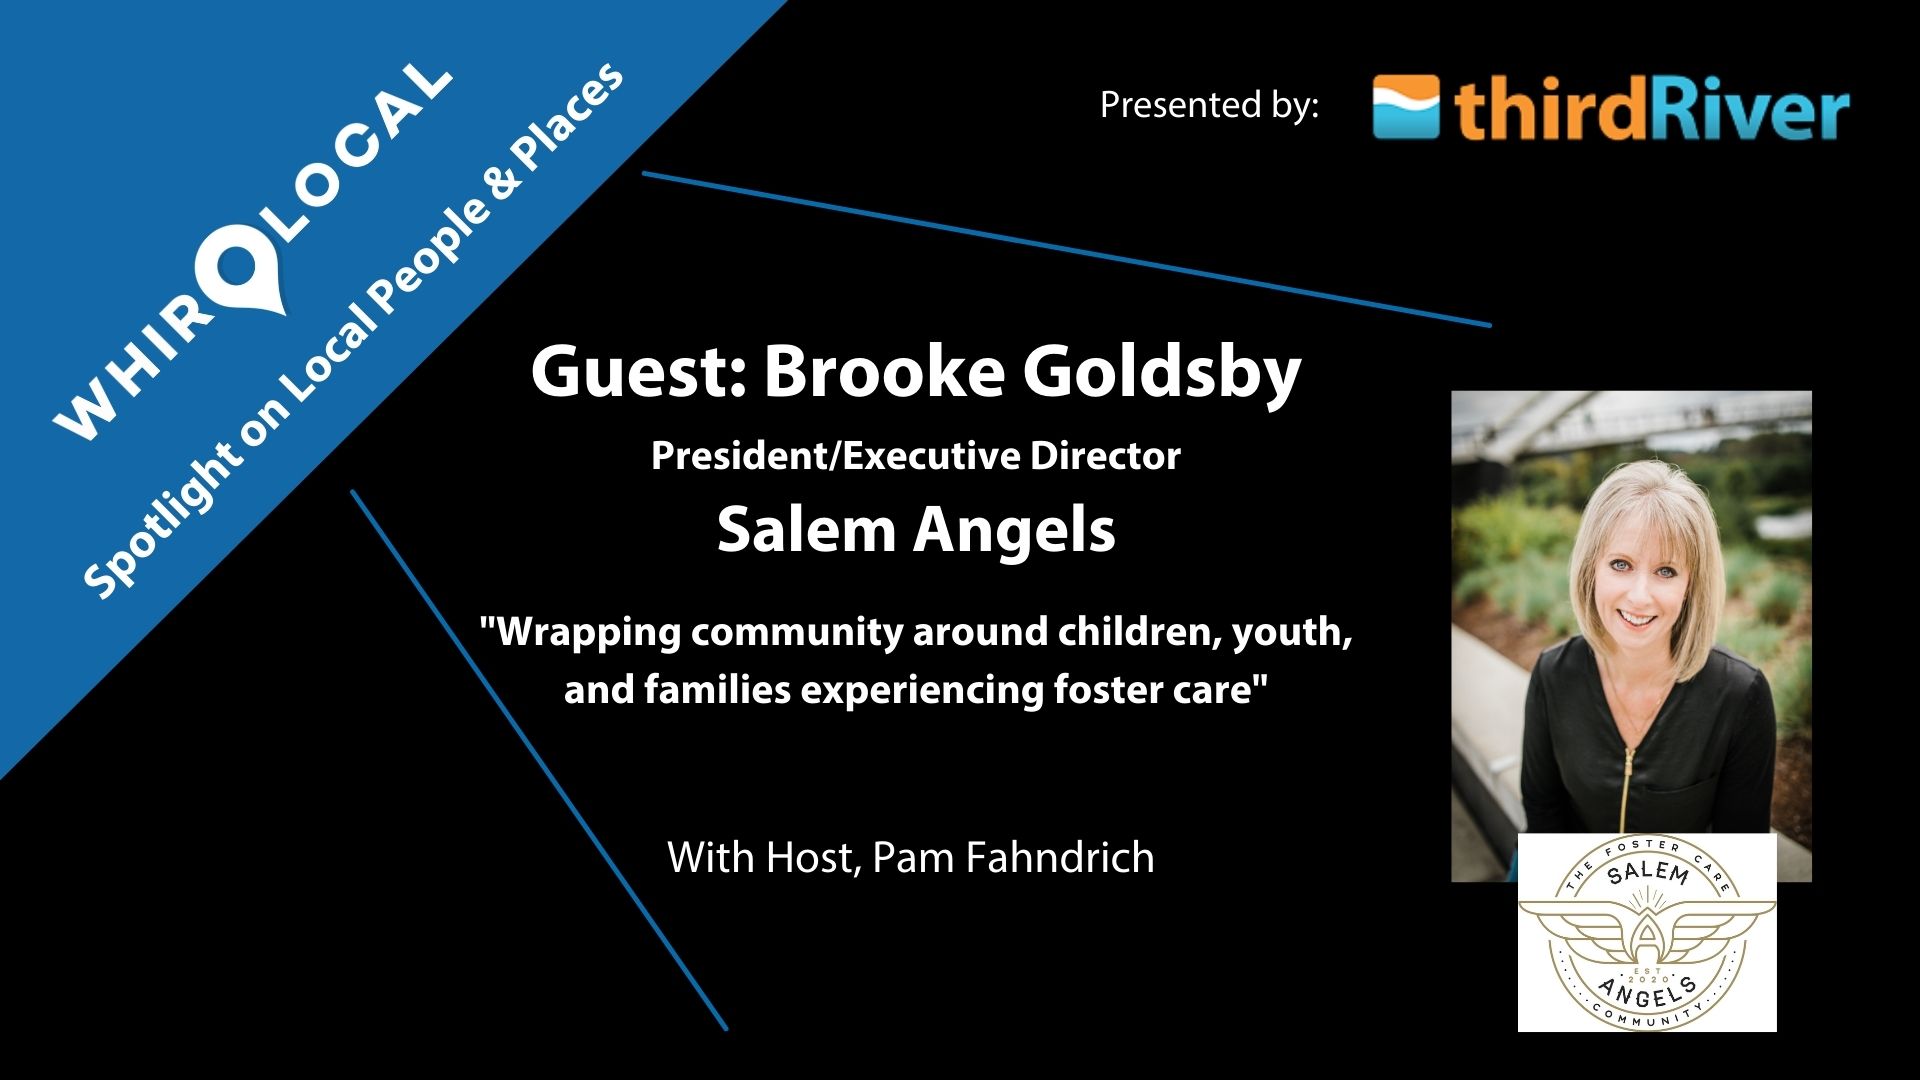 Interview with Brooke Goldsby, President/Executive Director of Salem Angels